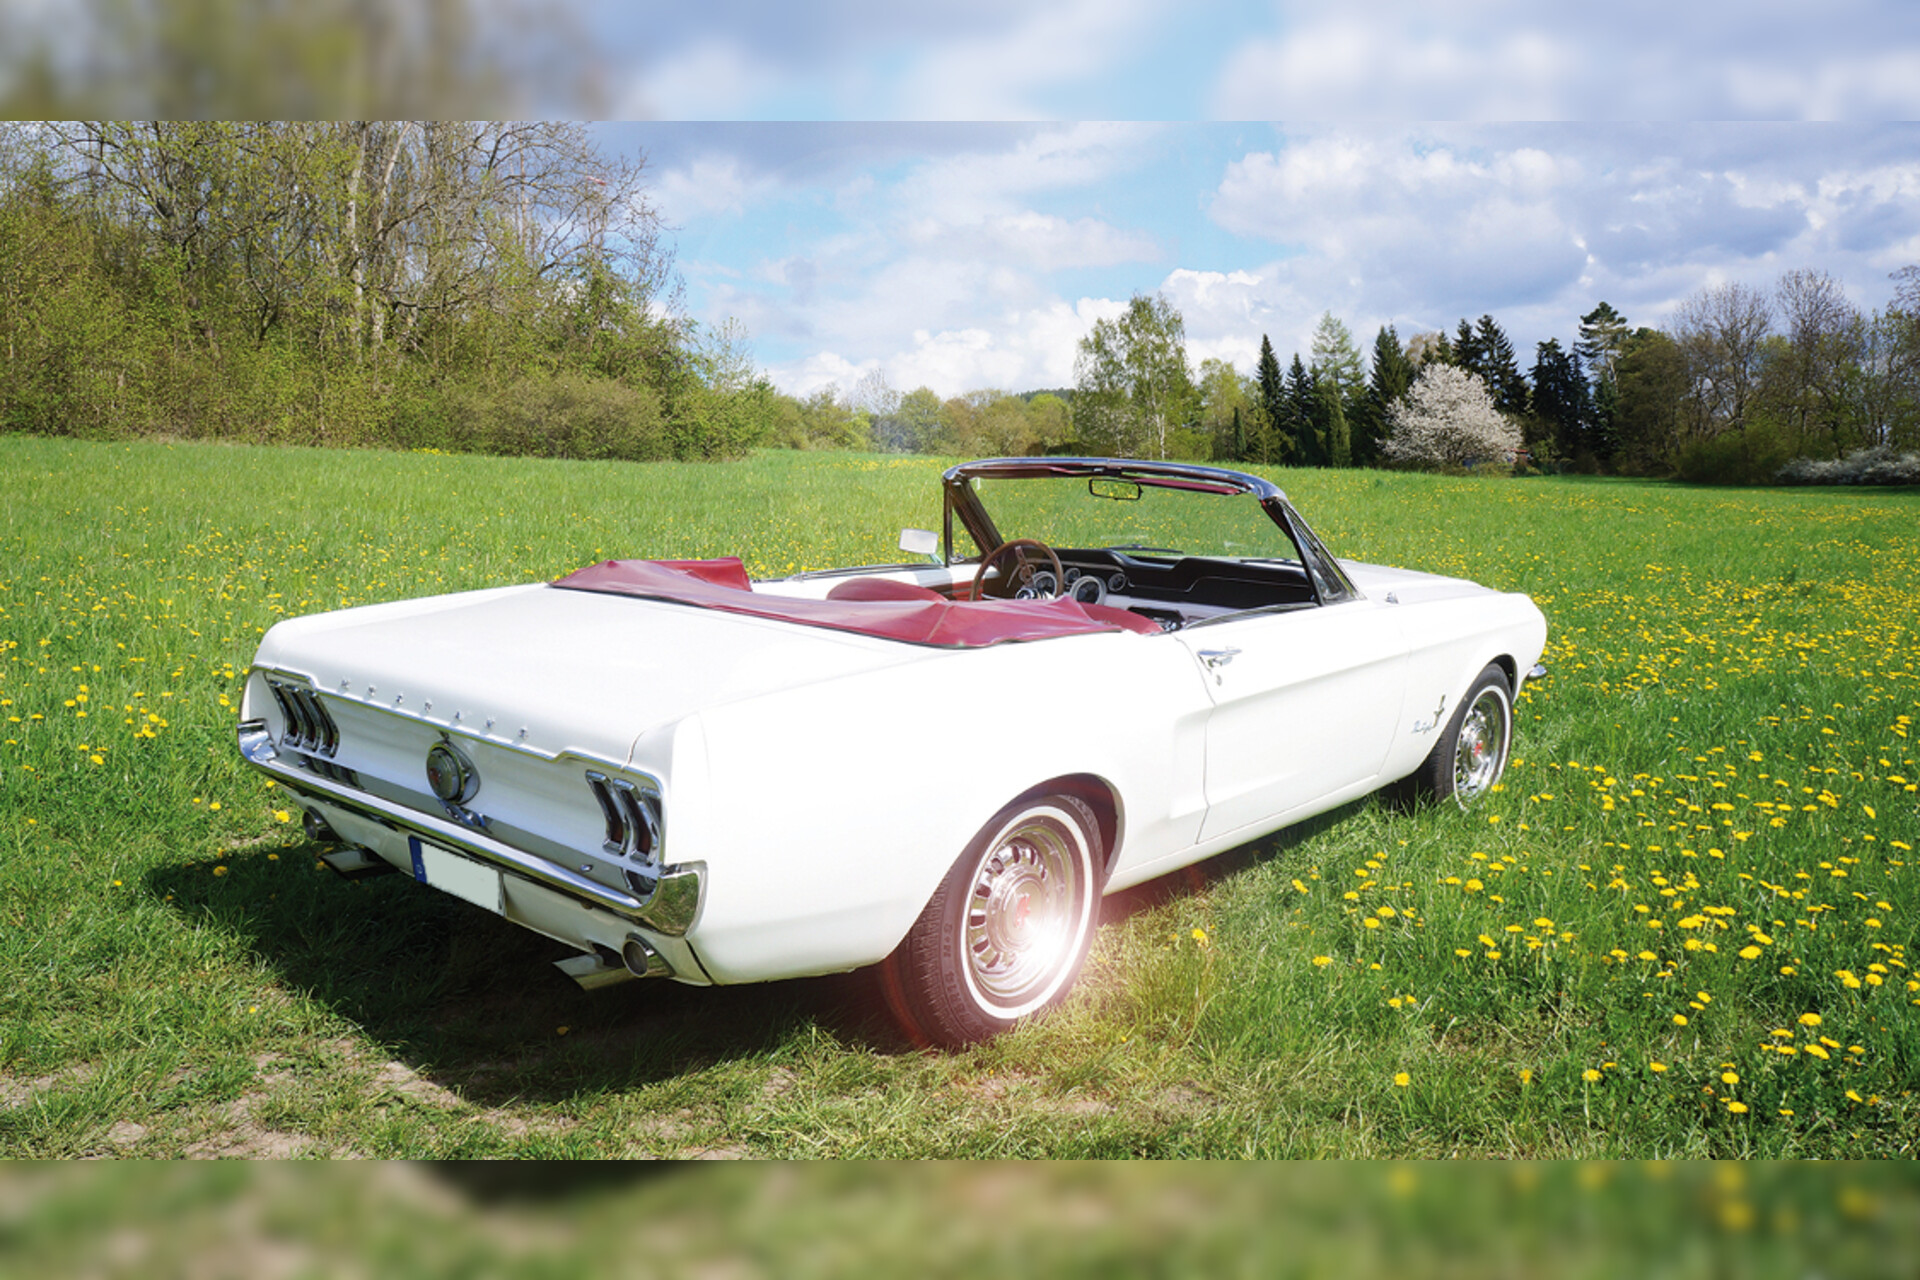 Ford Mustang Oldtimer fahren - 3 Stunden Thale, Harz ☀️ ab 169,00 €